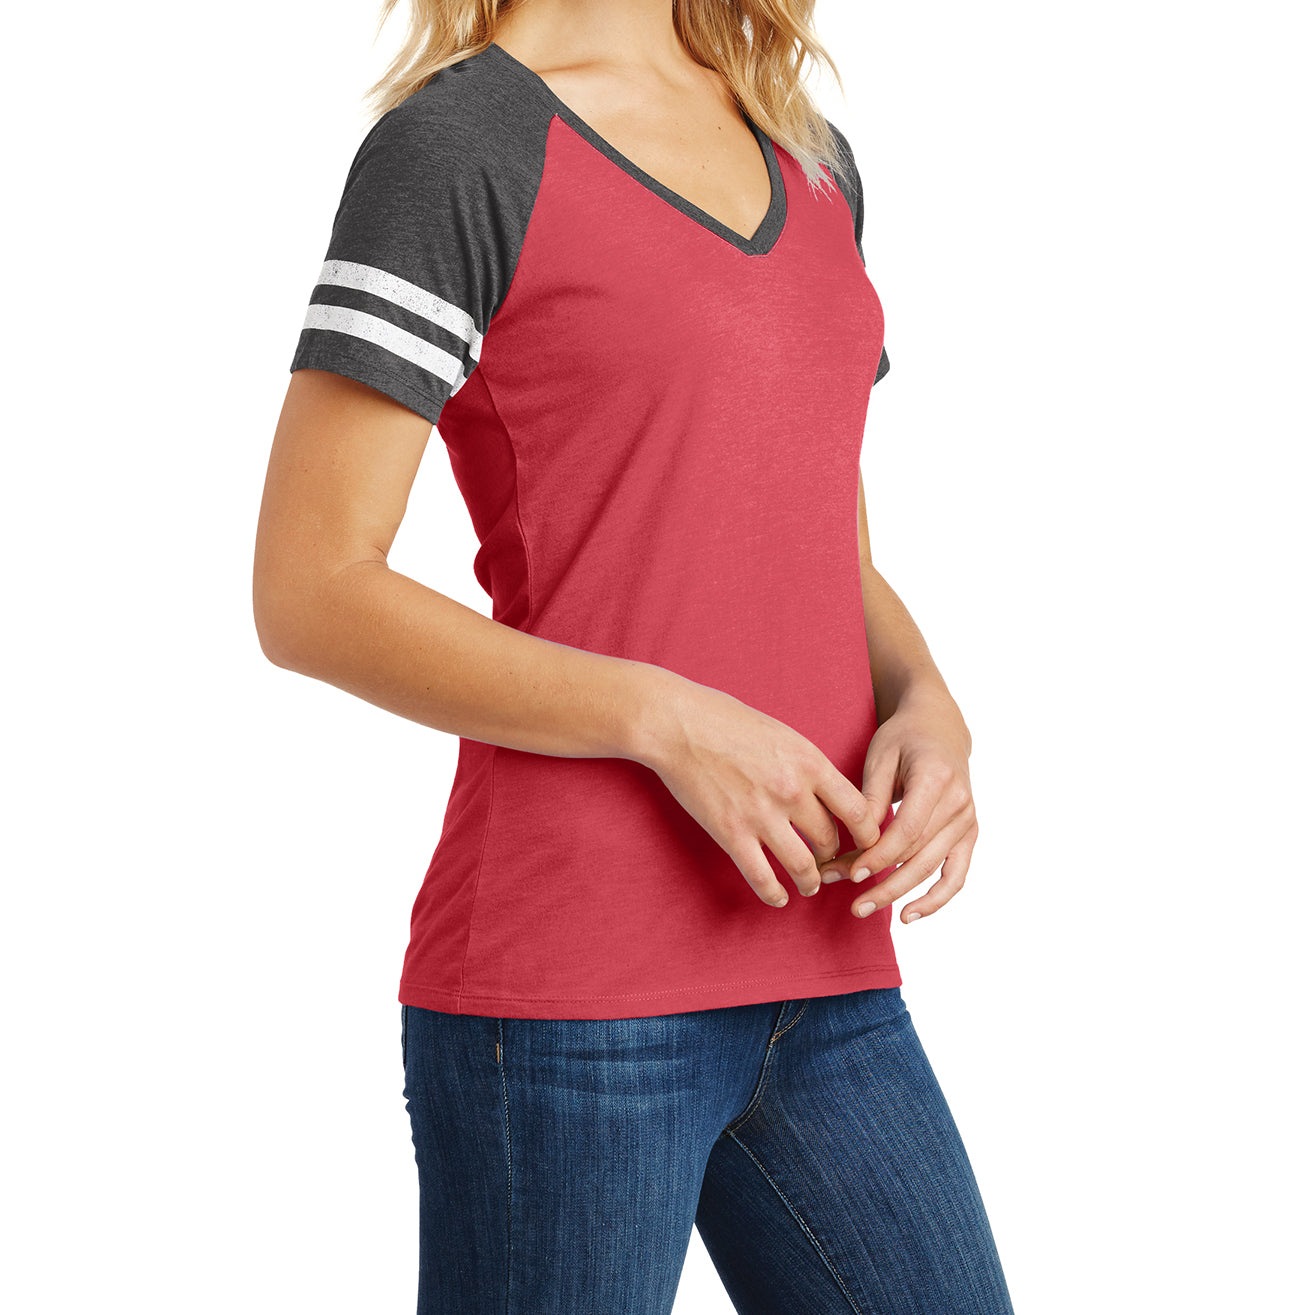 Womens Game V-Neck Tee - Heathered Red/Heathered Charcoal - Side